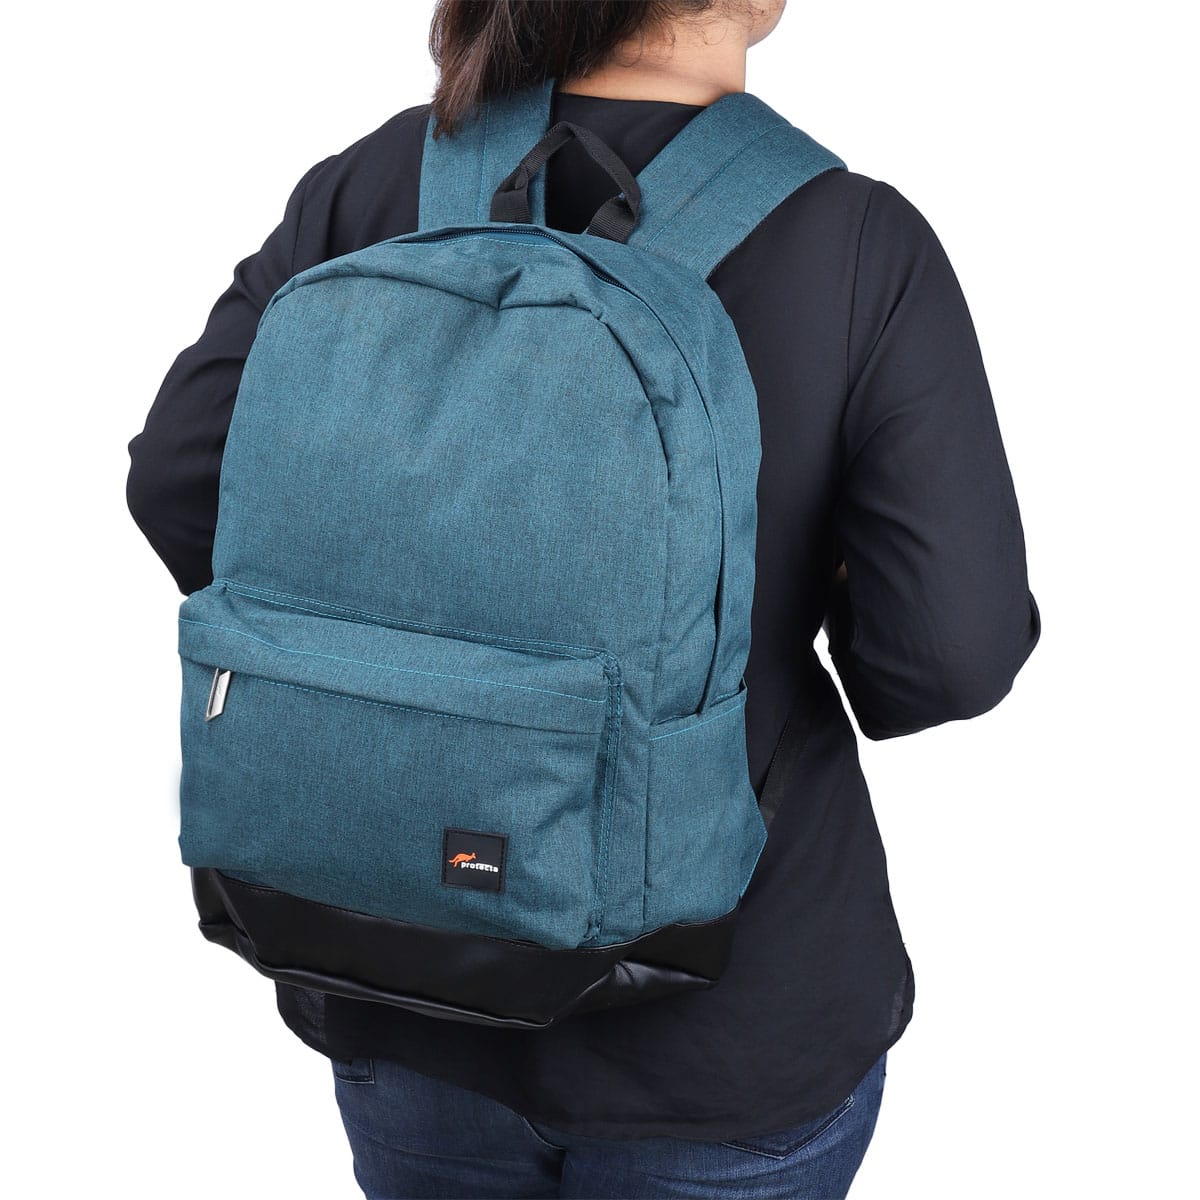 Moss Green | Protecta Chain Reaction Laptop Backpack-6